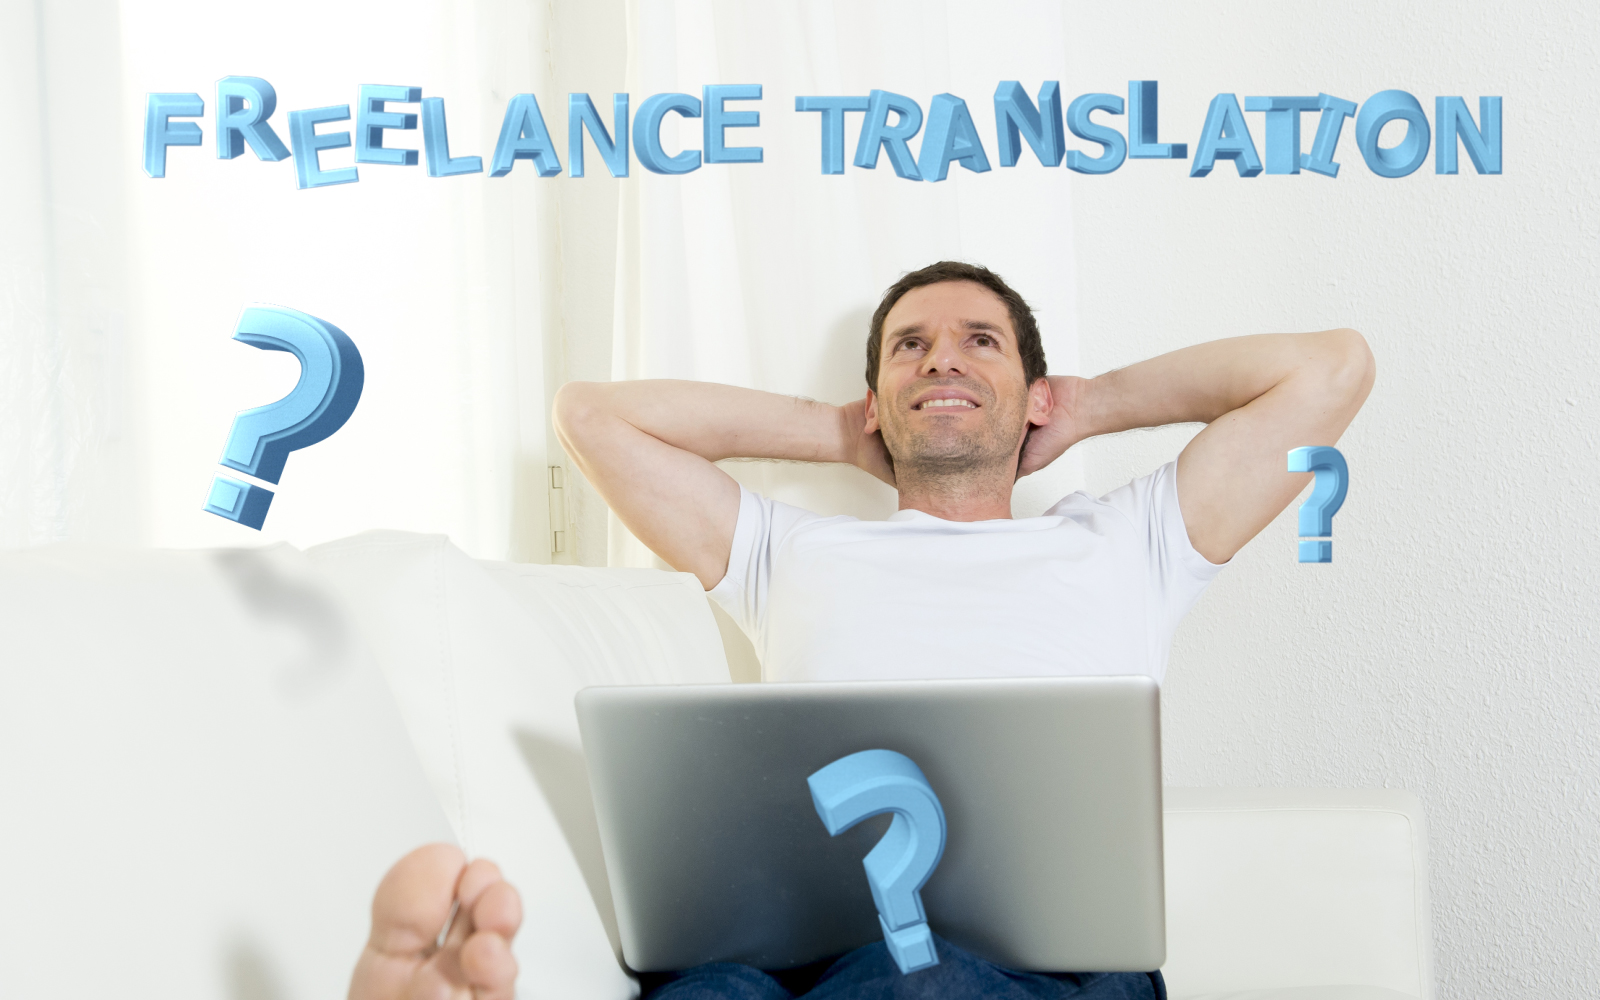 How to Be Successful as a Freelance Translator